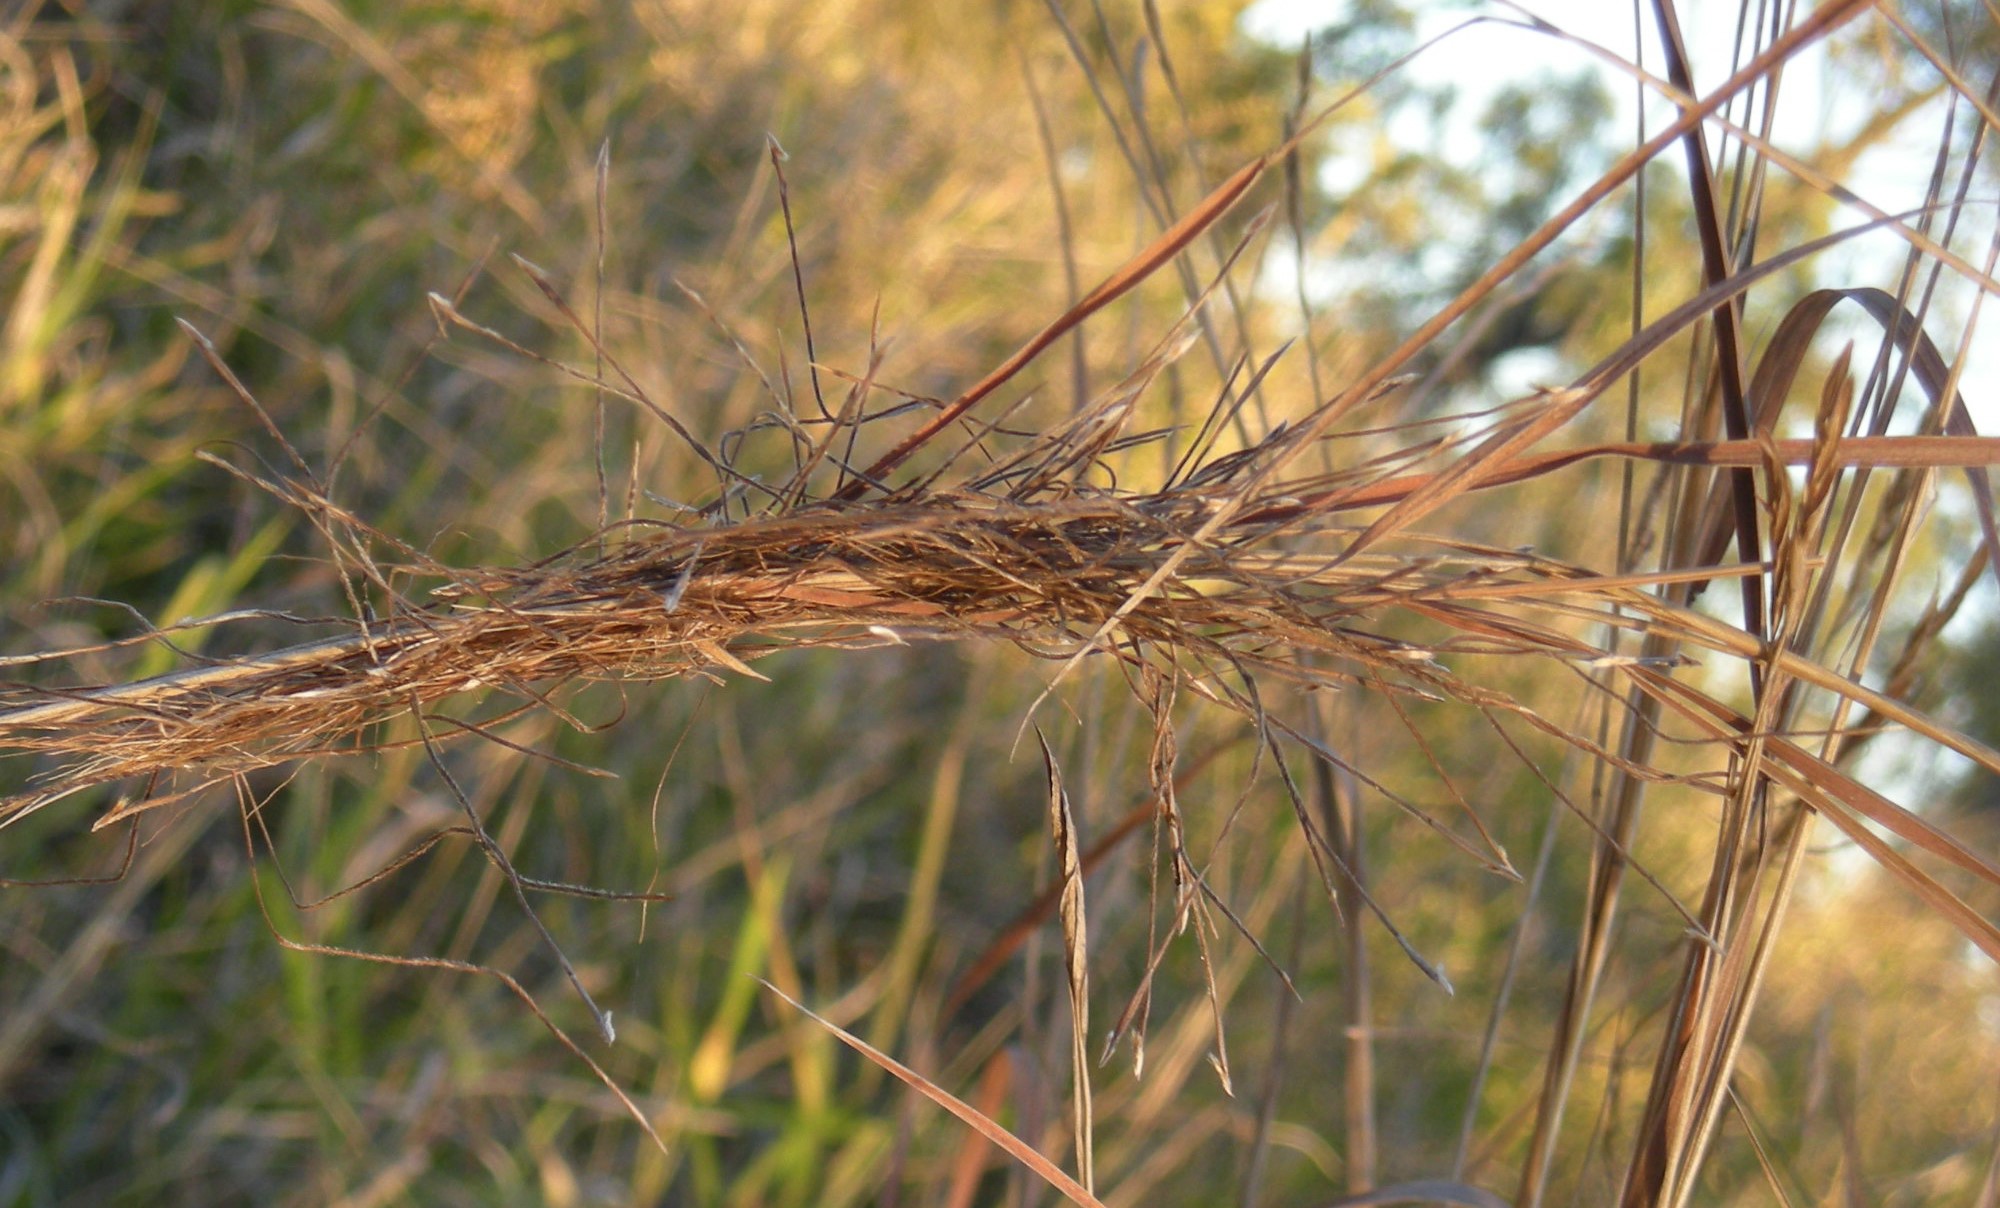 Photograph of a mature inflorescence of tanglehead showing tangle of spikelets with long, twisted awns that give the grass its name.